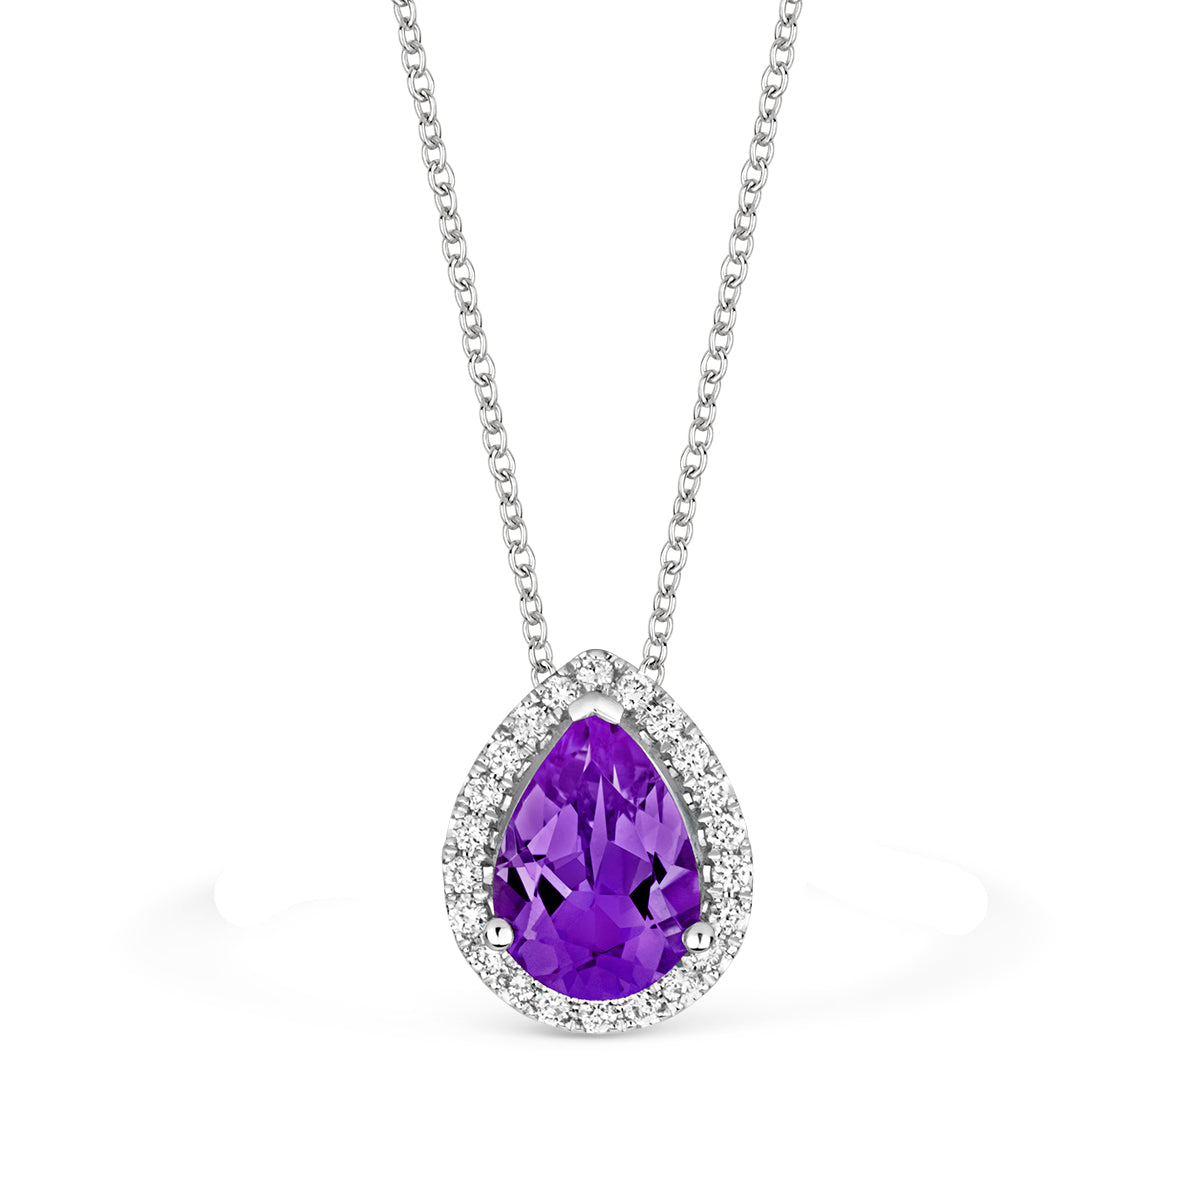 18ct White Gold Pear Cut Amethyst and Diamond Pendant